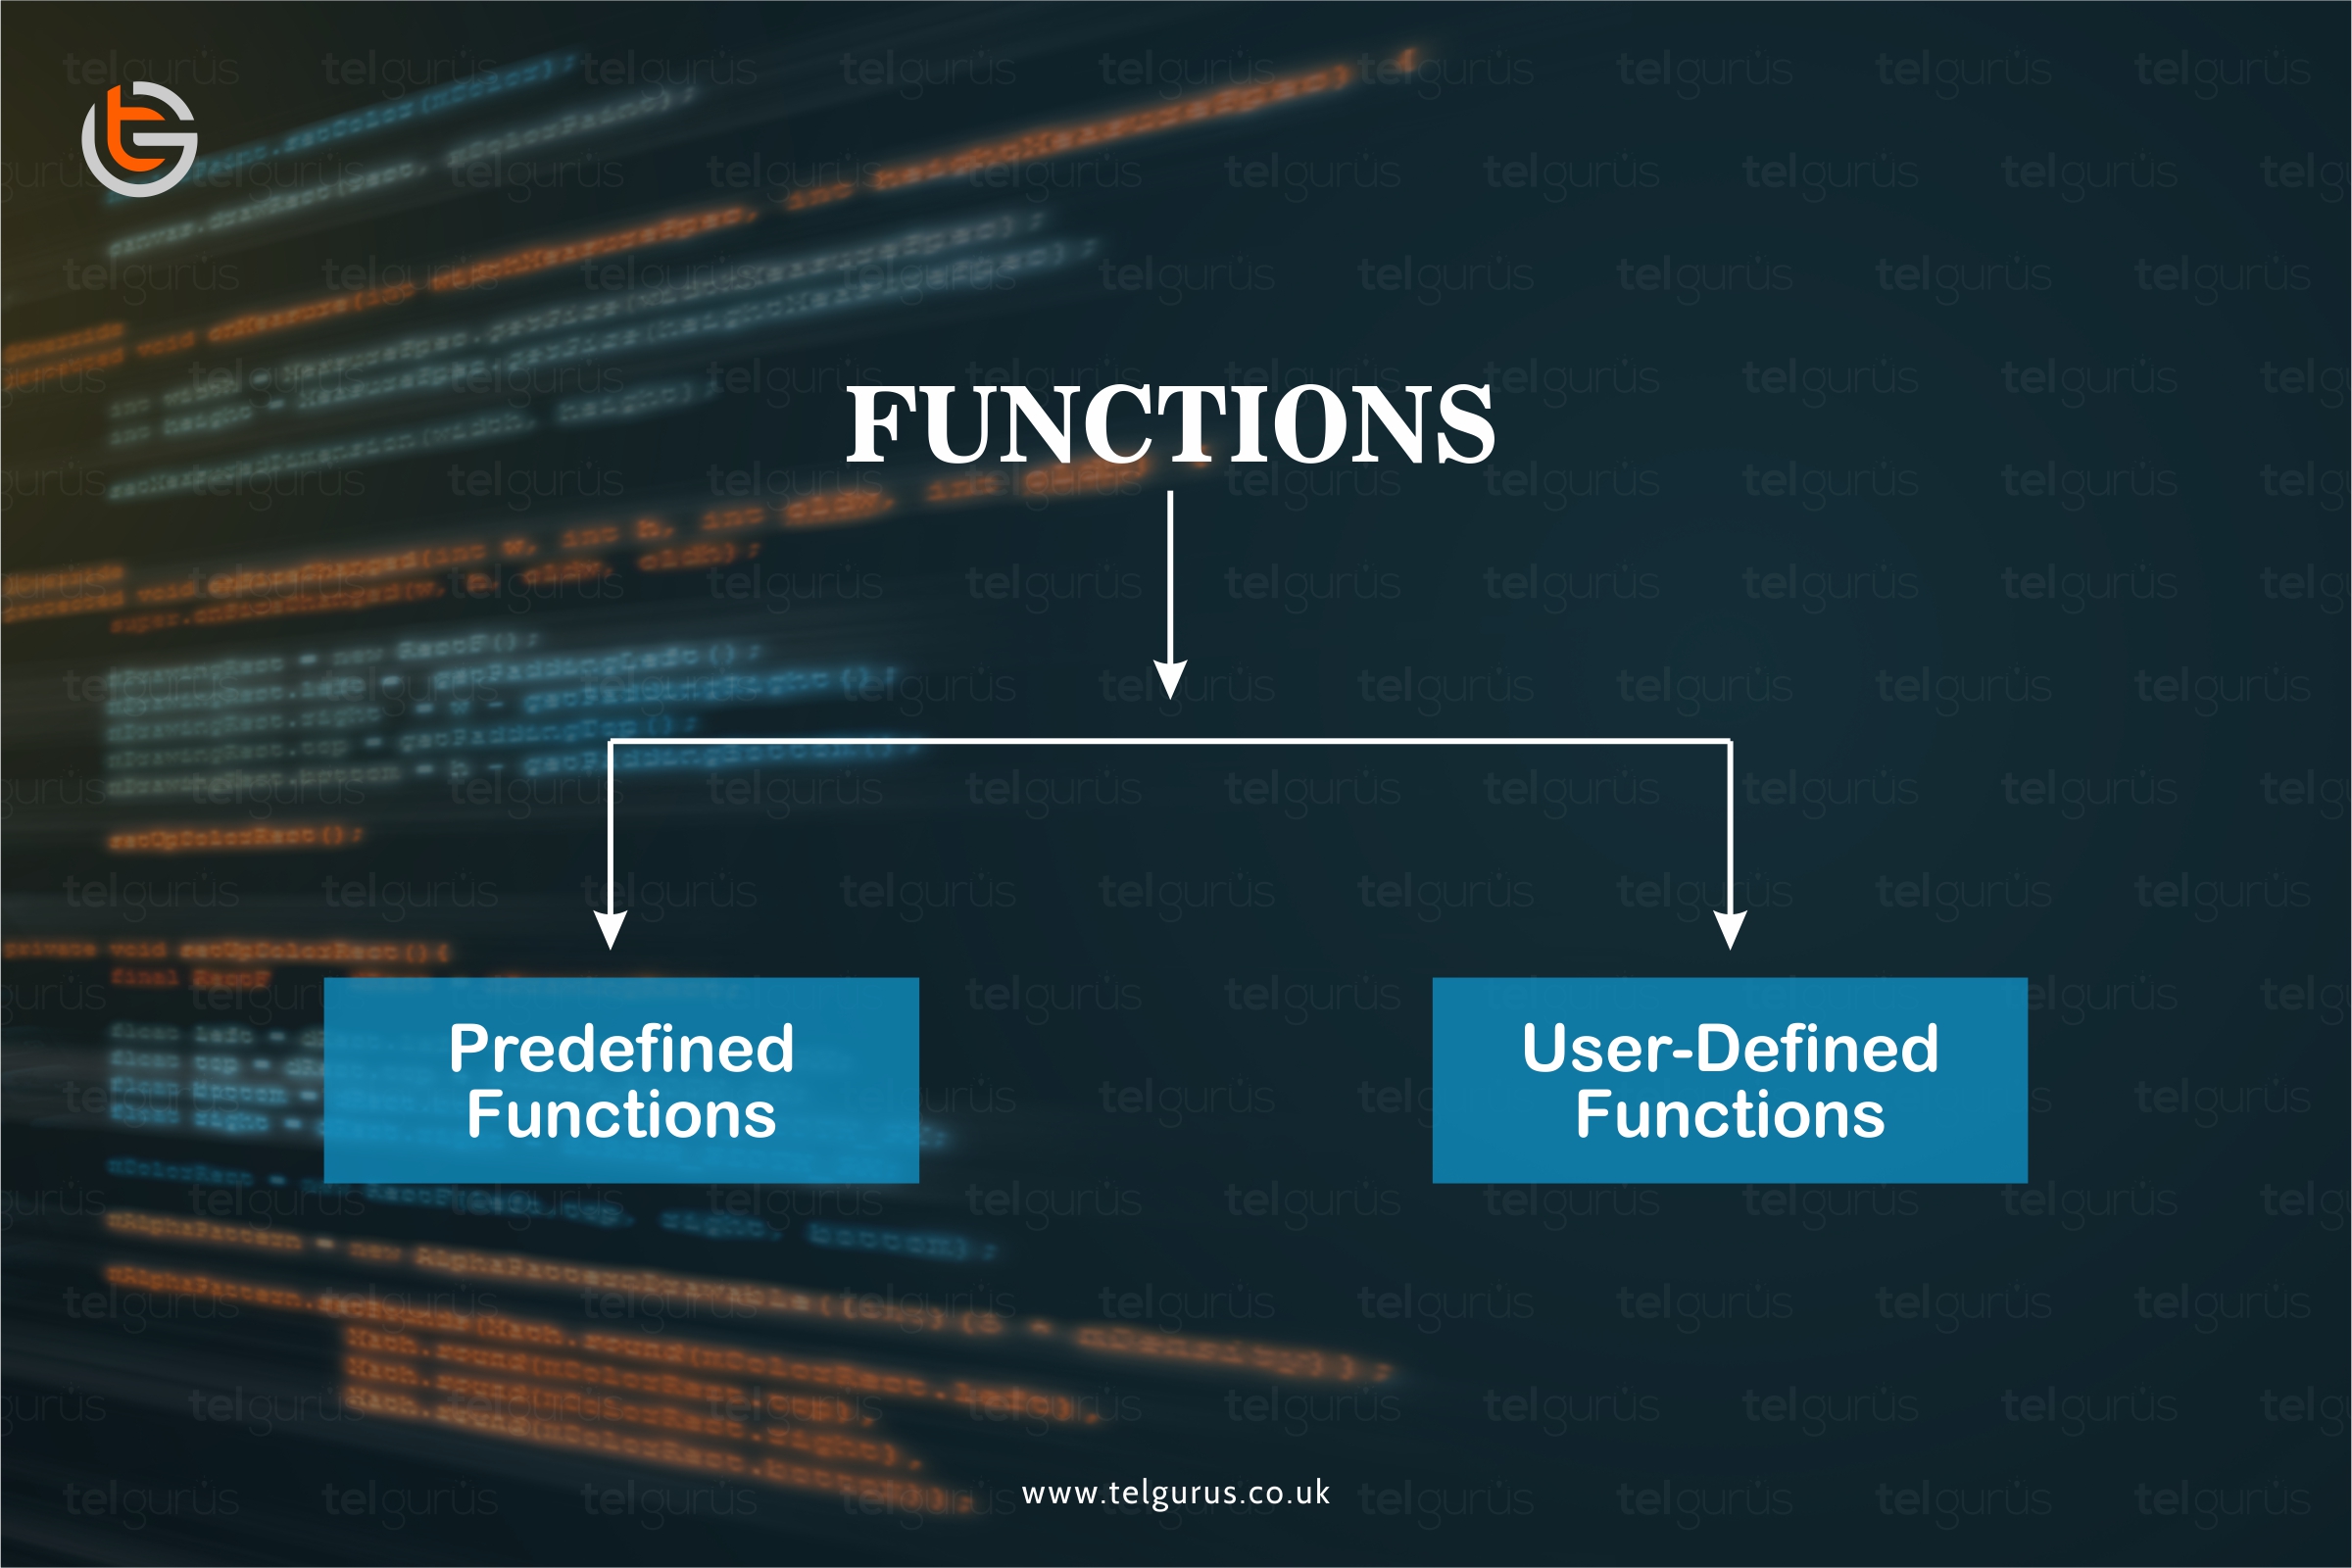 What are the major types of functions in program?